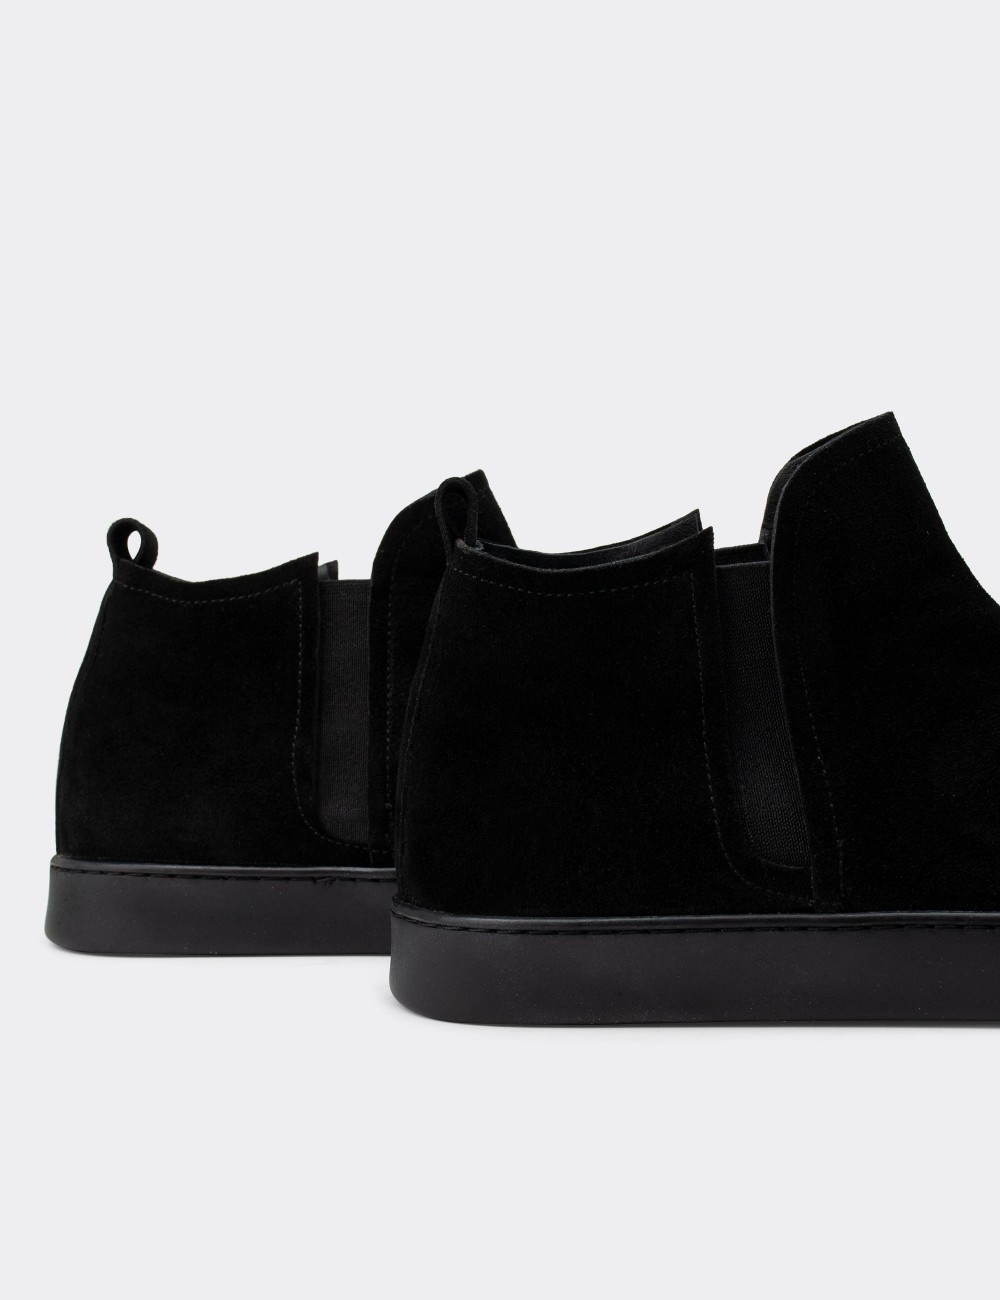 Black Suede Leather Sneakers - 01864MSYHC01